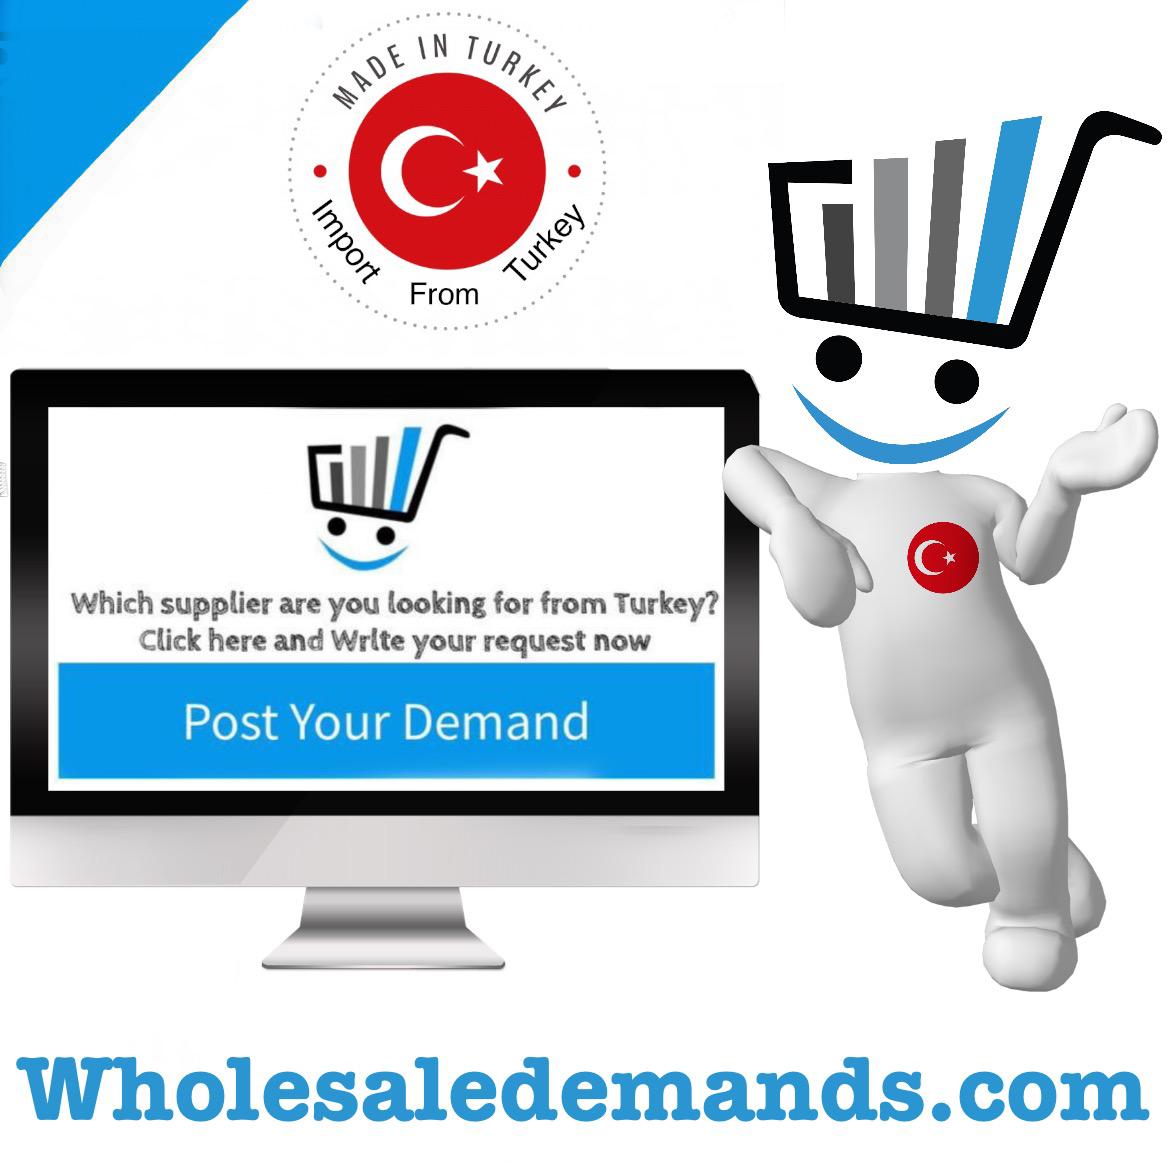 The expansion of internet retail in Turkey is aided by mobile and social media shopping. 
Continued development of online retail is expected to grow at double-digit rates in Turkey, where the present percentage of total retail sales is less than 5%, well behind the online to total retail ratio of major European economies. According to the survey by yStats.com, over half of Turkish internet buyers purchased products using a portable device last year, indicating that mobile commerce is a component in the growth. A comparable percentage of internet shoppers used social media to place their orders. Turkey's predicted rise in B2C E-Commerce is aided by rising Internet and online shopper penetration rates.


Increased rivalry among retailers is fuelled by the growth of internet retail.
The growth of internet commerce in Turkey has drawn the interest of foreign players. Amazon set up shop in the country in 2018. Hepsiburada, Trendyol and N11 were the top online merchants in Turkey in the year of 2017, though these and other online specialists face competition from established retailers' growing multichannel offerings, which are helping to overcome the barriers of concern about online payments and a preference for in-person shopping, according to the yStats.com report.
Turkey's recent past of strong development in B2C E-Marketing, as well as its prospect for further progress, making this industry appealing to both international and domestic companies
Clothing is by far the most frequently purchased category for B2C E-Commerce in Turkey. According to the conclusions of yStats.com's survey, both men and women buy for clothes online. 


Other information about internet sales is contained in the research.
The article includes information on the methods of payment allowed in the top 100 merchants' online stores in Turkey, as well as information on buyer preferences, such as the fact that clothes is the most popular product category in online shopping, followed by home items.

 
